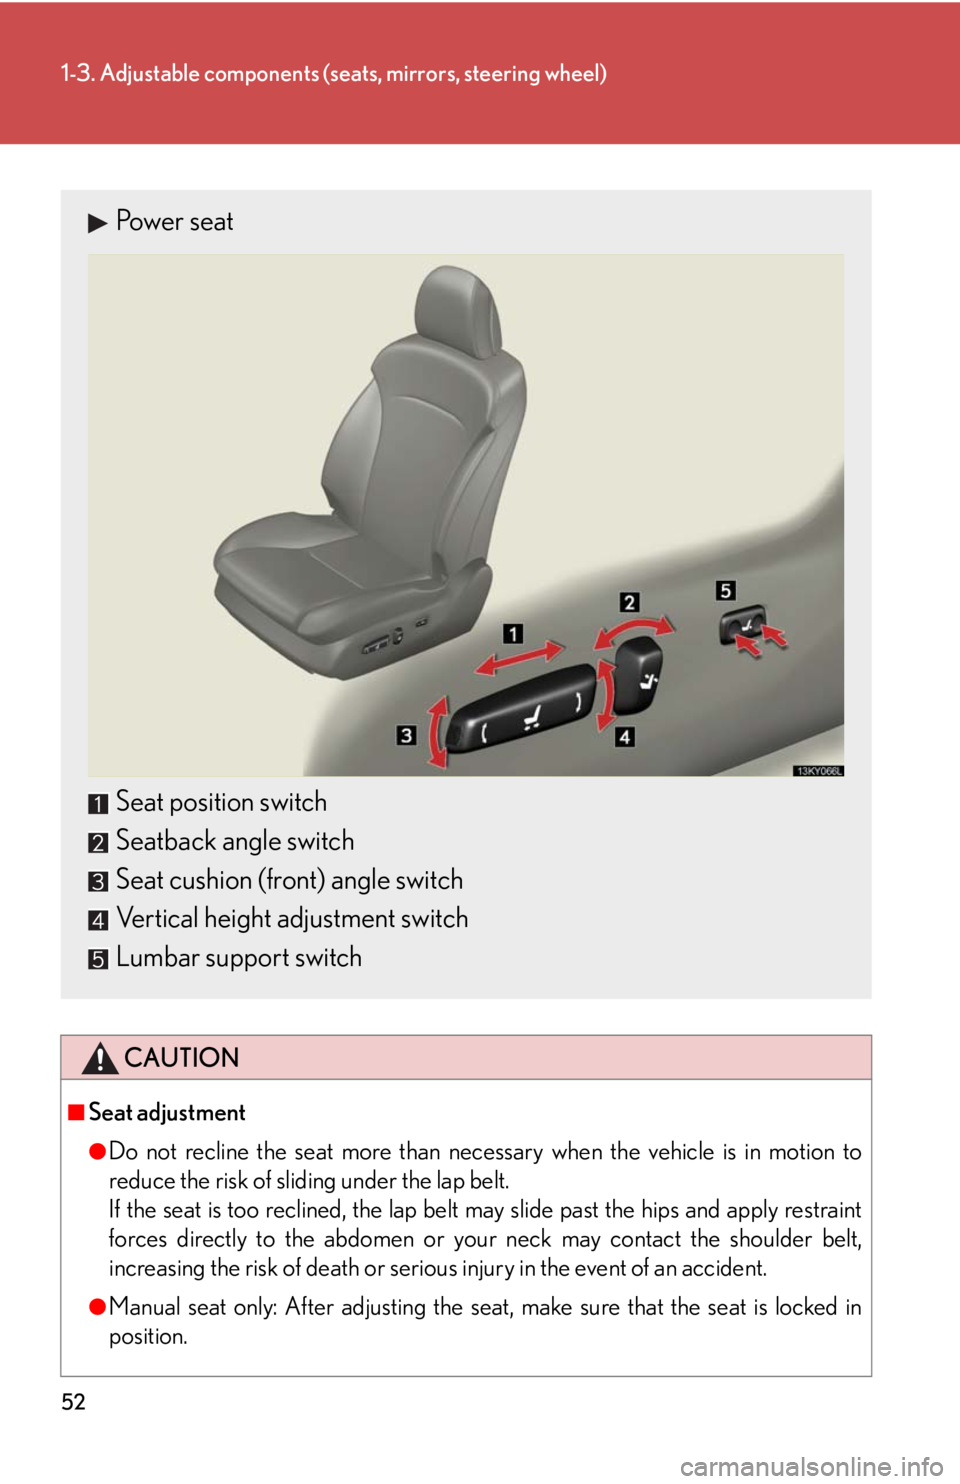 Lexus IS250 2010  Do-It-Yourself Maintenance / LEXUS 2010 IS350 IS250 OWNERS MANUAL (OM53A23U) 52
1-3. Adjustable components (seats, mirrors, steering wheel)
CAUTION
■Seat adjustment
●Do not recline the seat more than necessary when the vehicle is in motion to
reduce the risk of sliding und